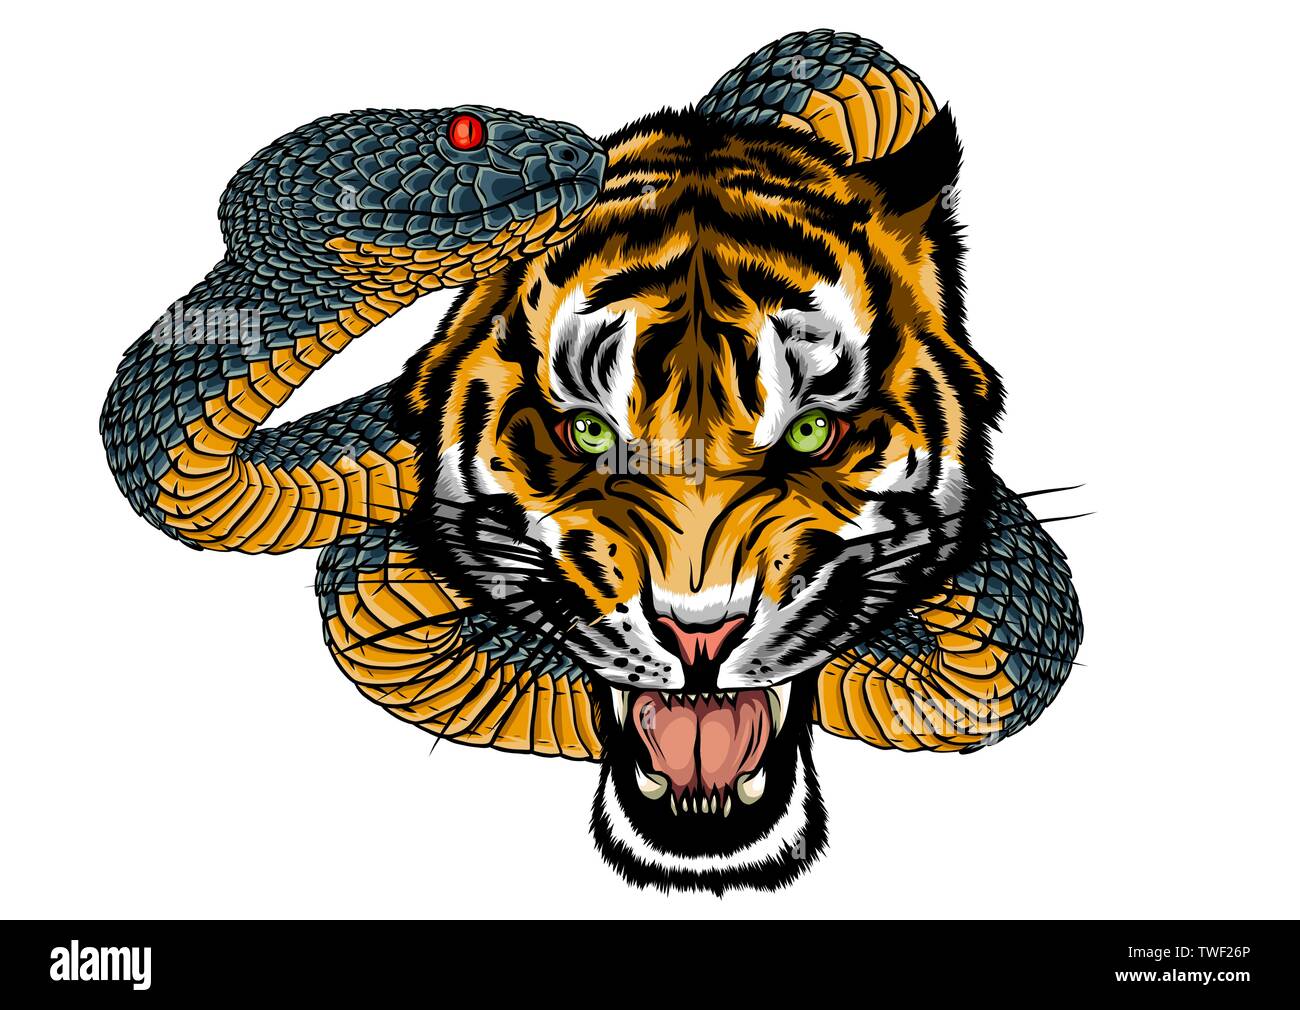 snake and tiger fighting, tattoo vector illustration Stock Vector